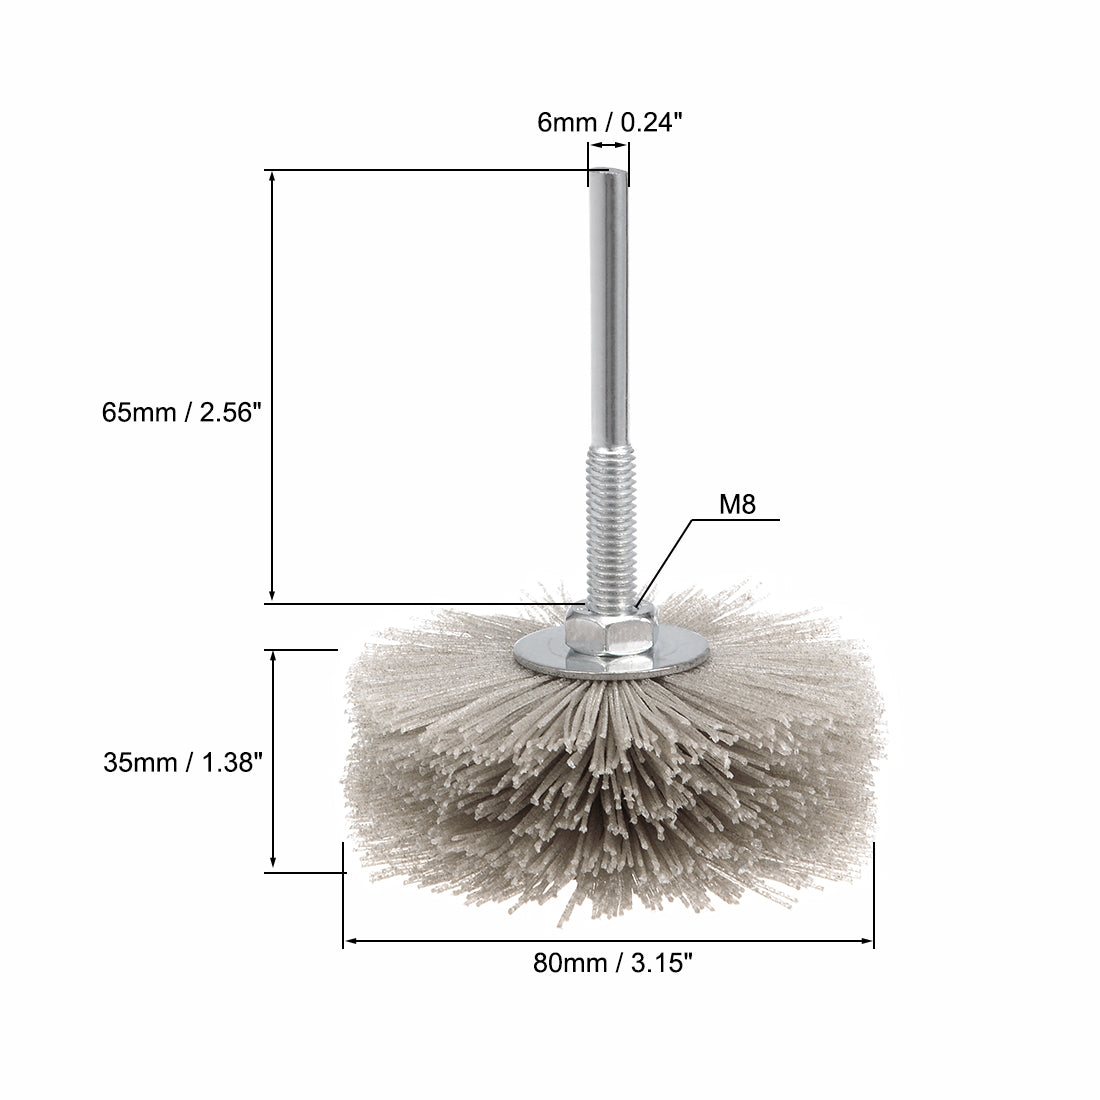 Uxcell Uxcell Nylon Wheel Brush 80 Grits Abrasive Grinding Head with 6mm Threaded Shank